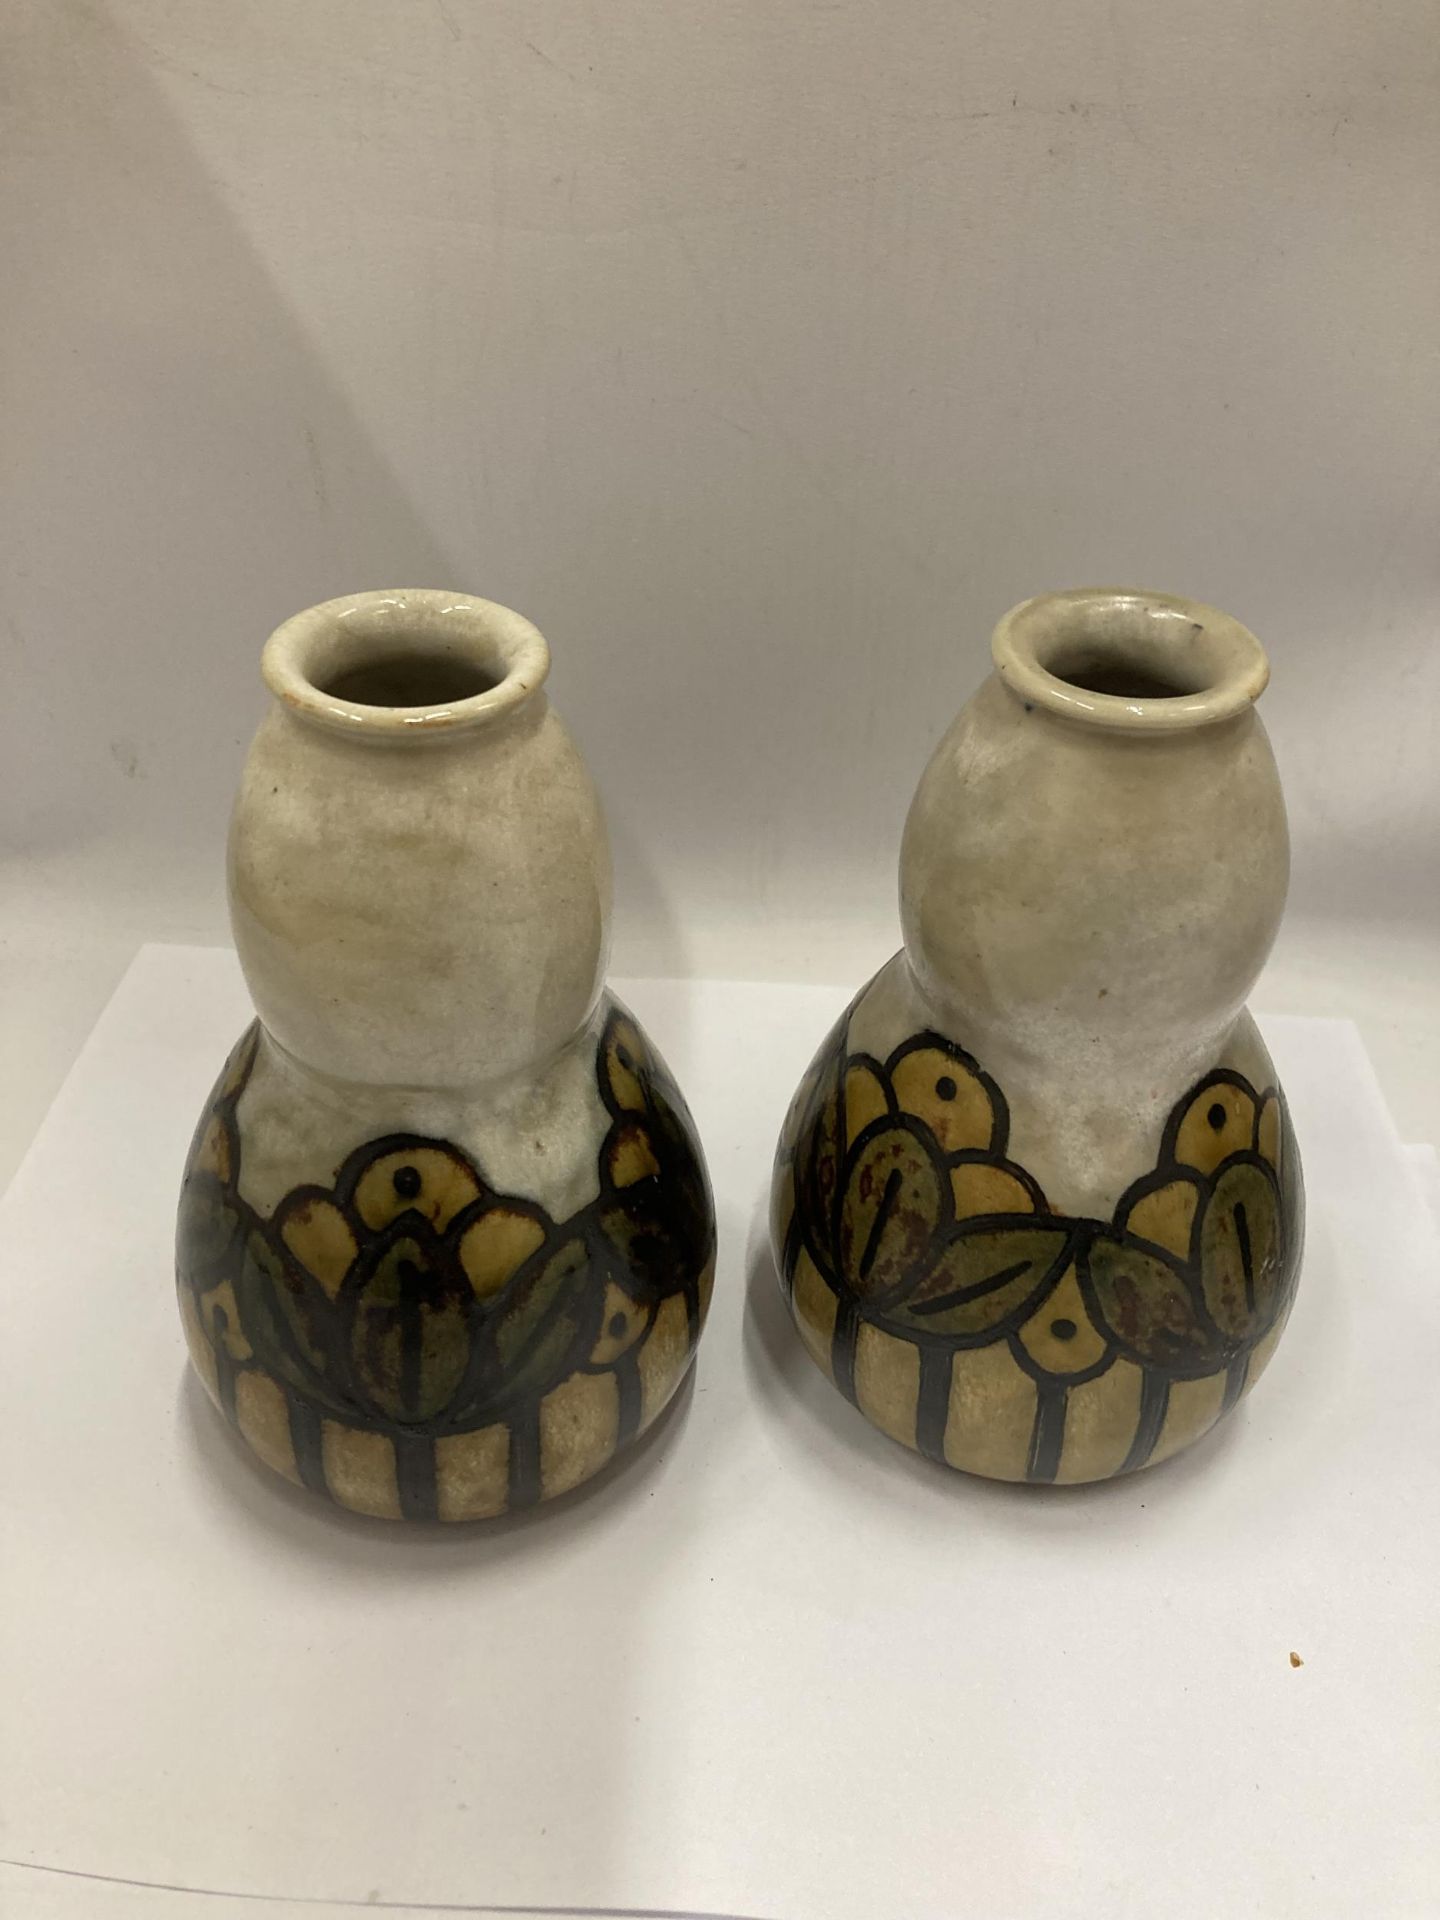 A PAIR OF EARLY ROYAL DOULTON VASES - Image 2 of 3